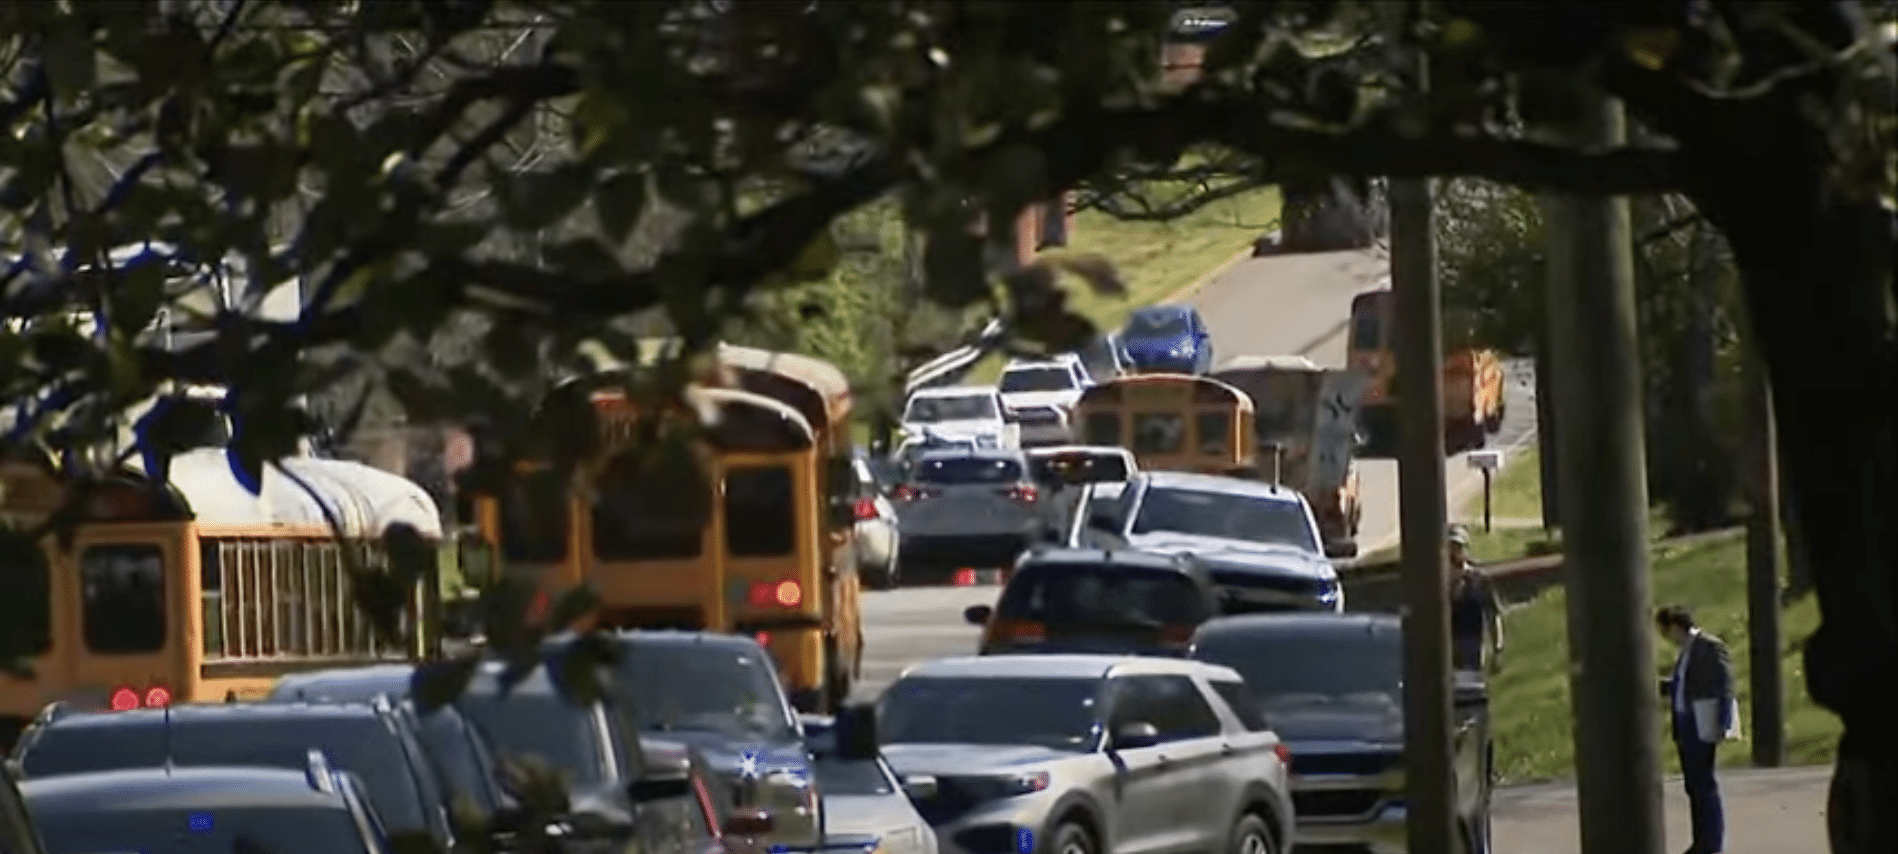 DEVELOPING: 28 year-old Female shooter guns down 3 children and 3 staff members in Christian elementary school shooting in Nashville